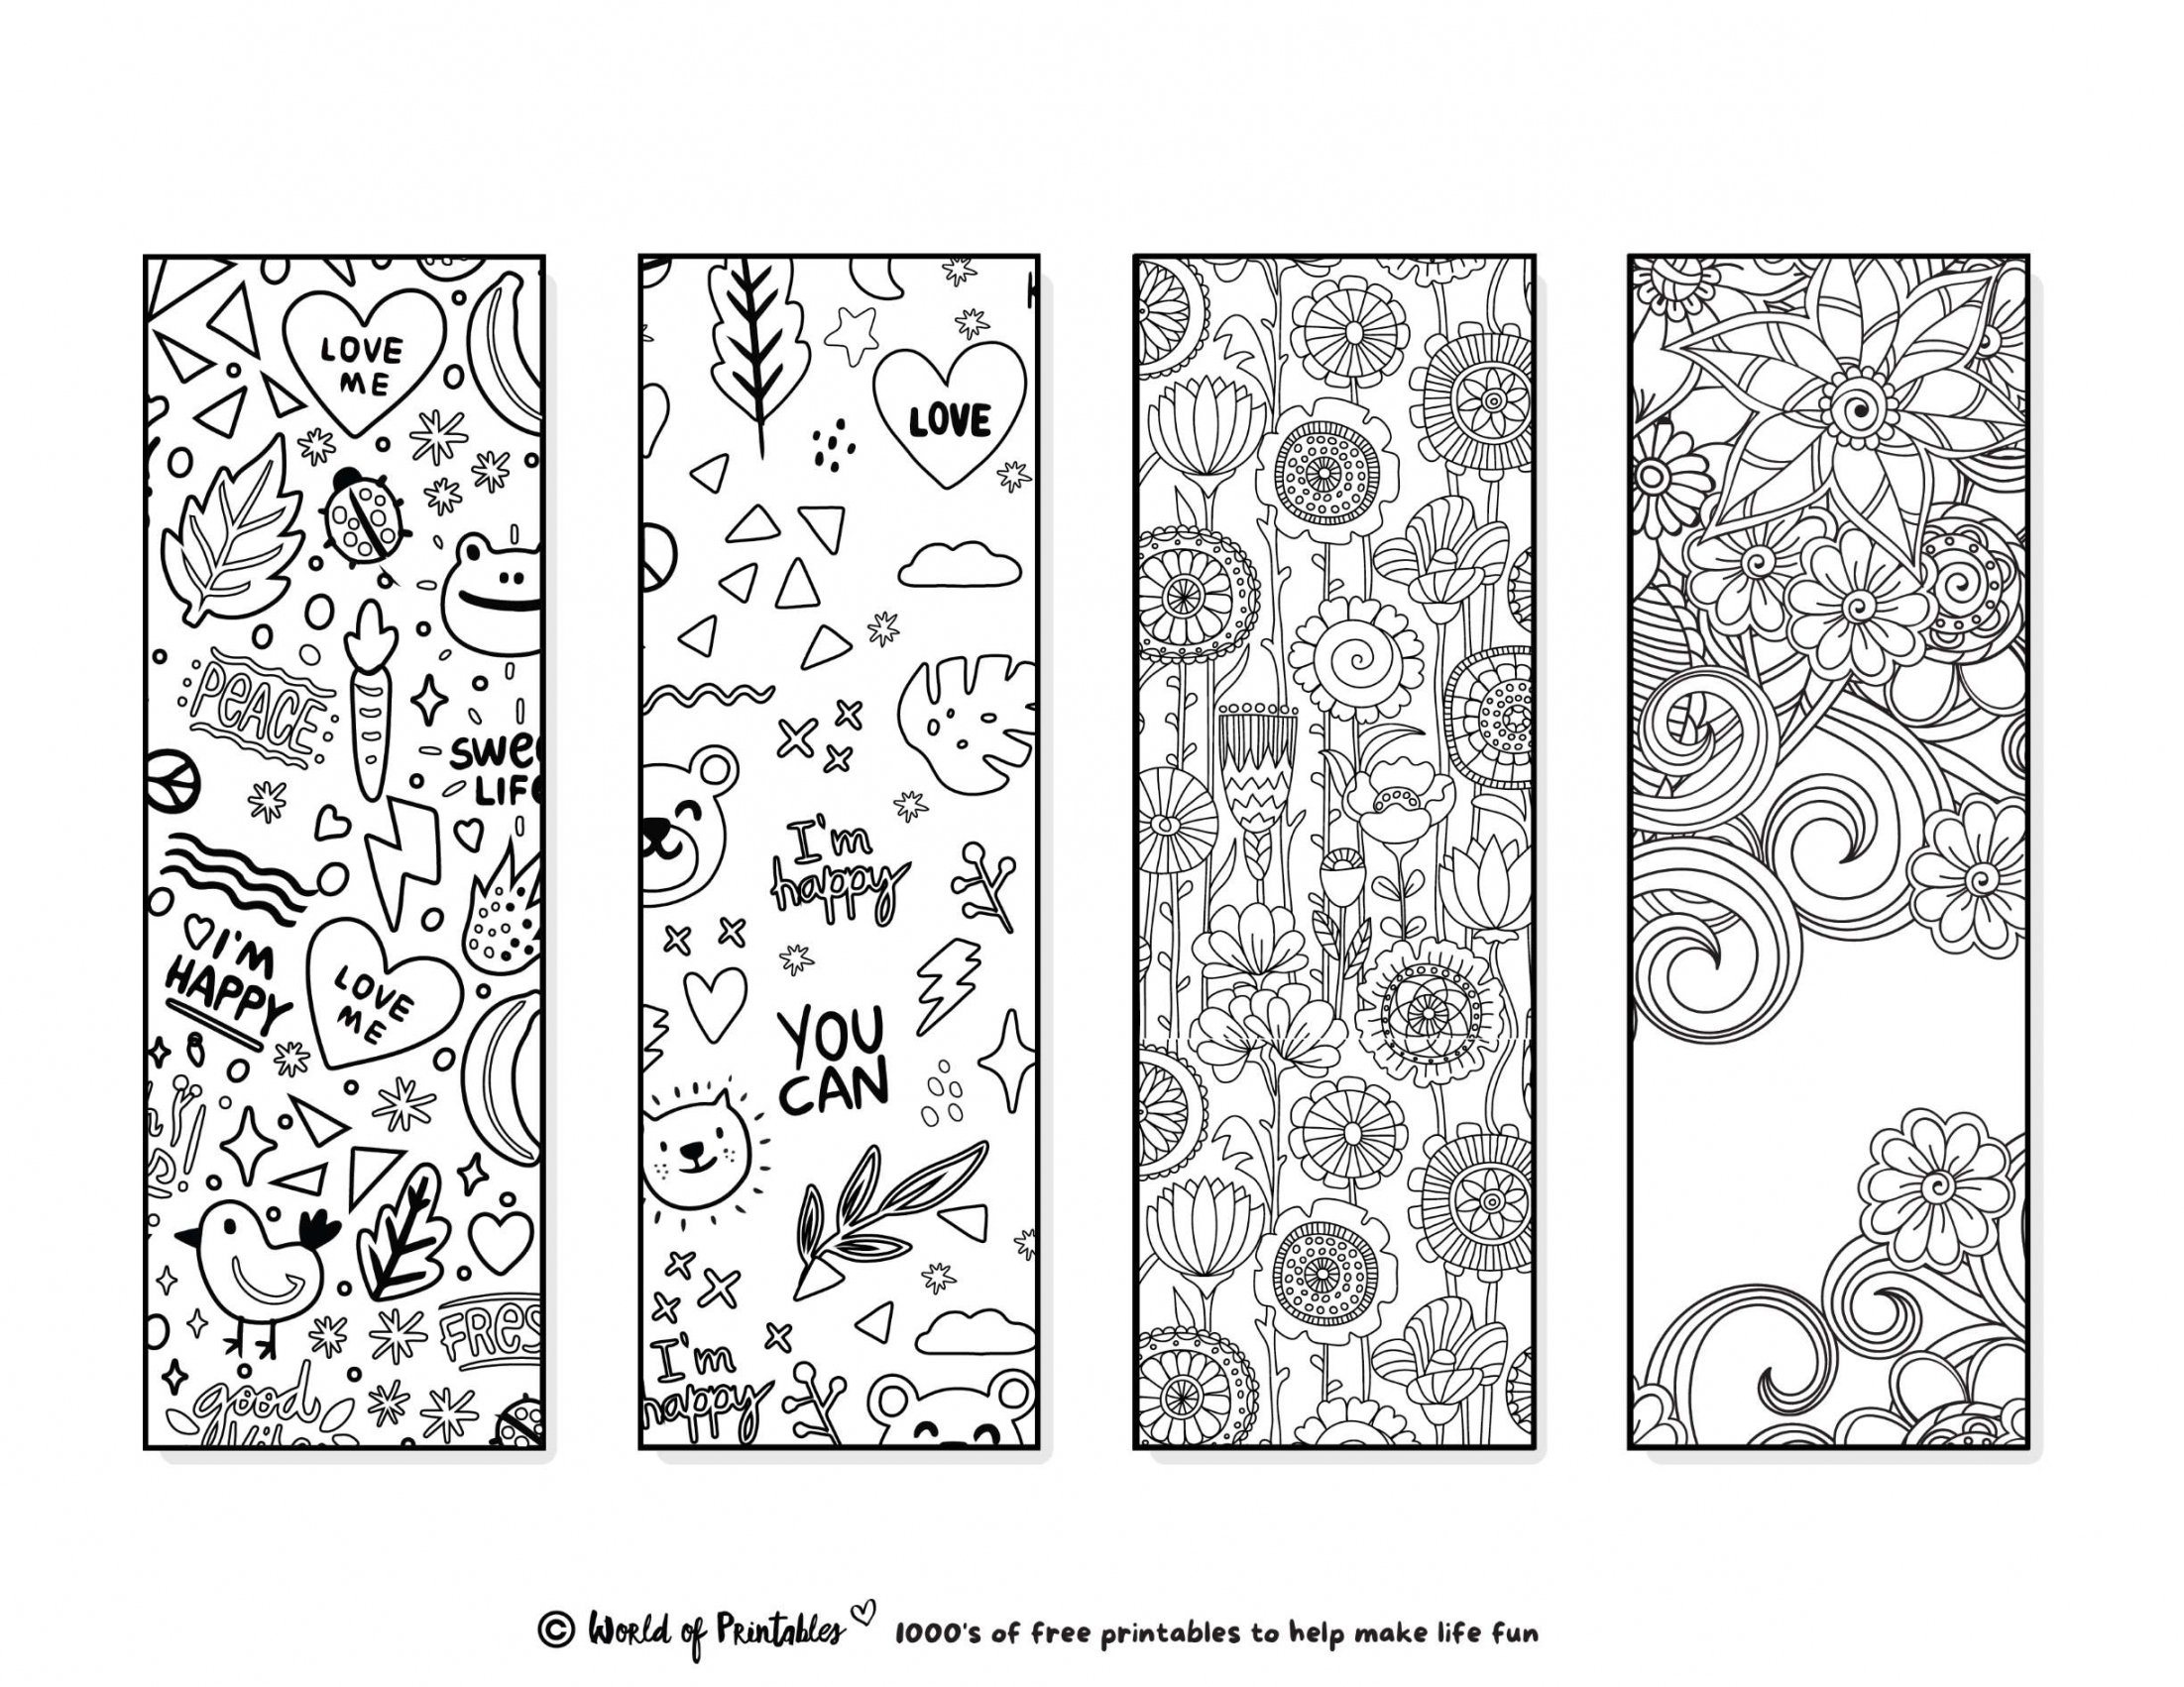 Printable Bookmarks To Color   For Adults & Kids - World of  - FREE Printables - Cute Free Printable Bookmarks To Color